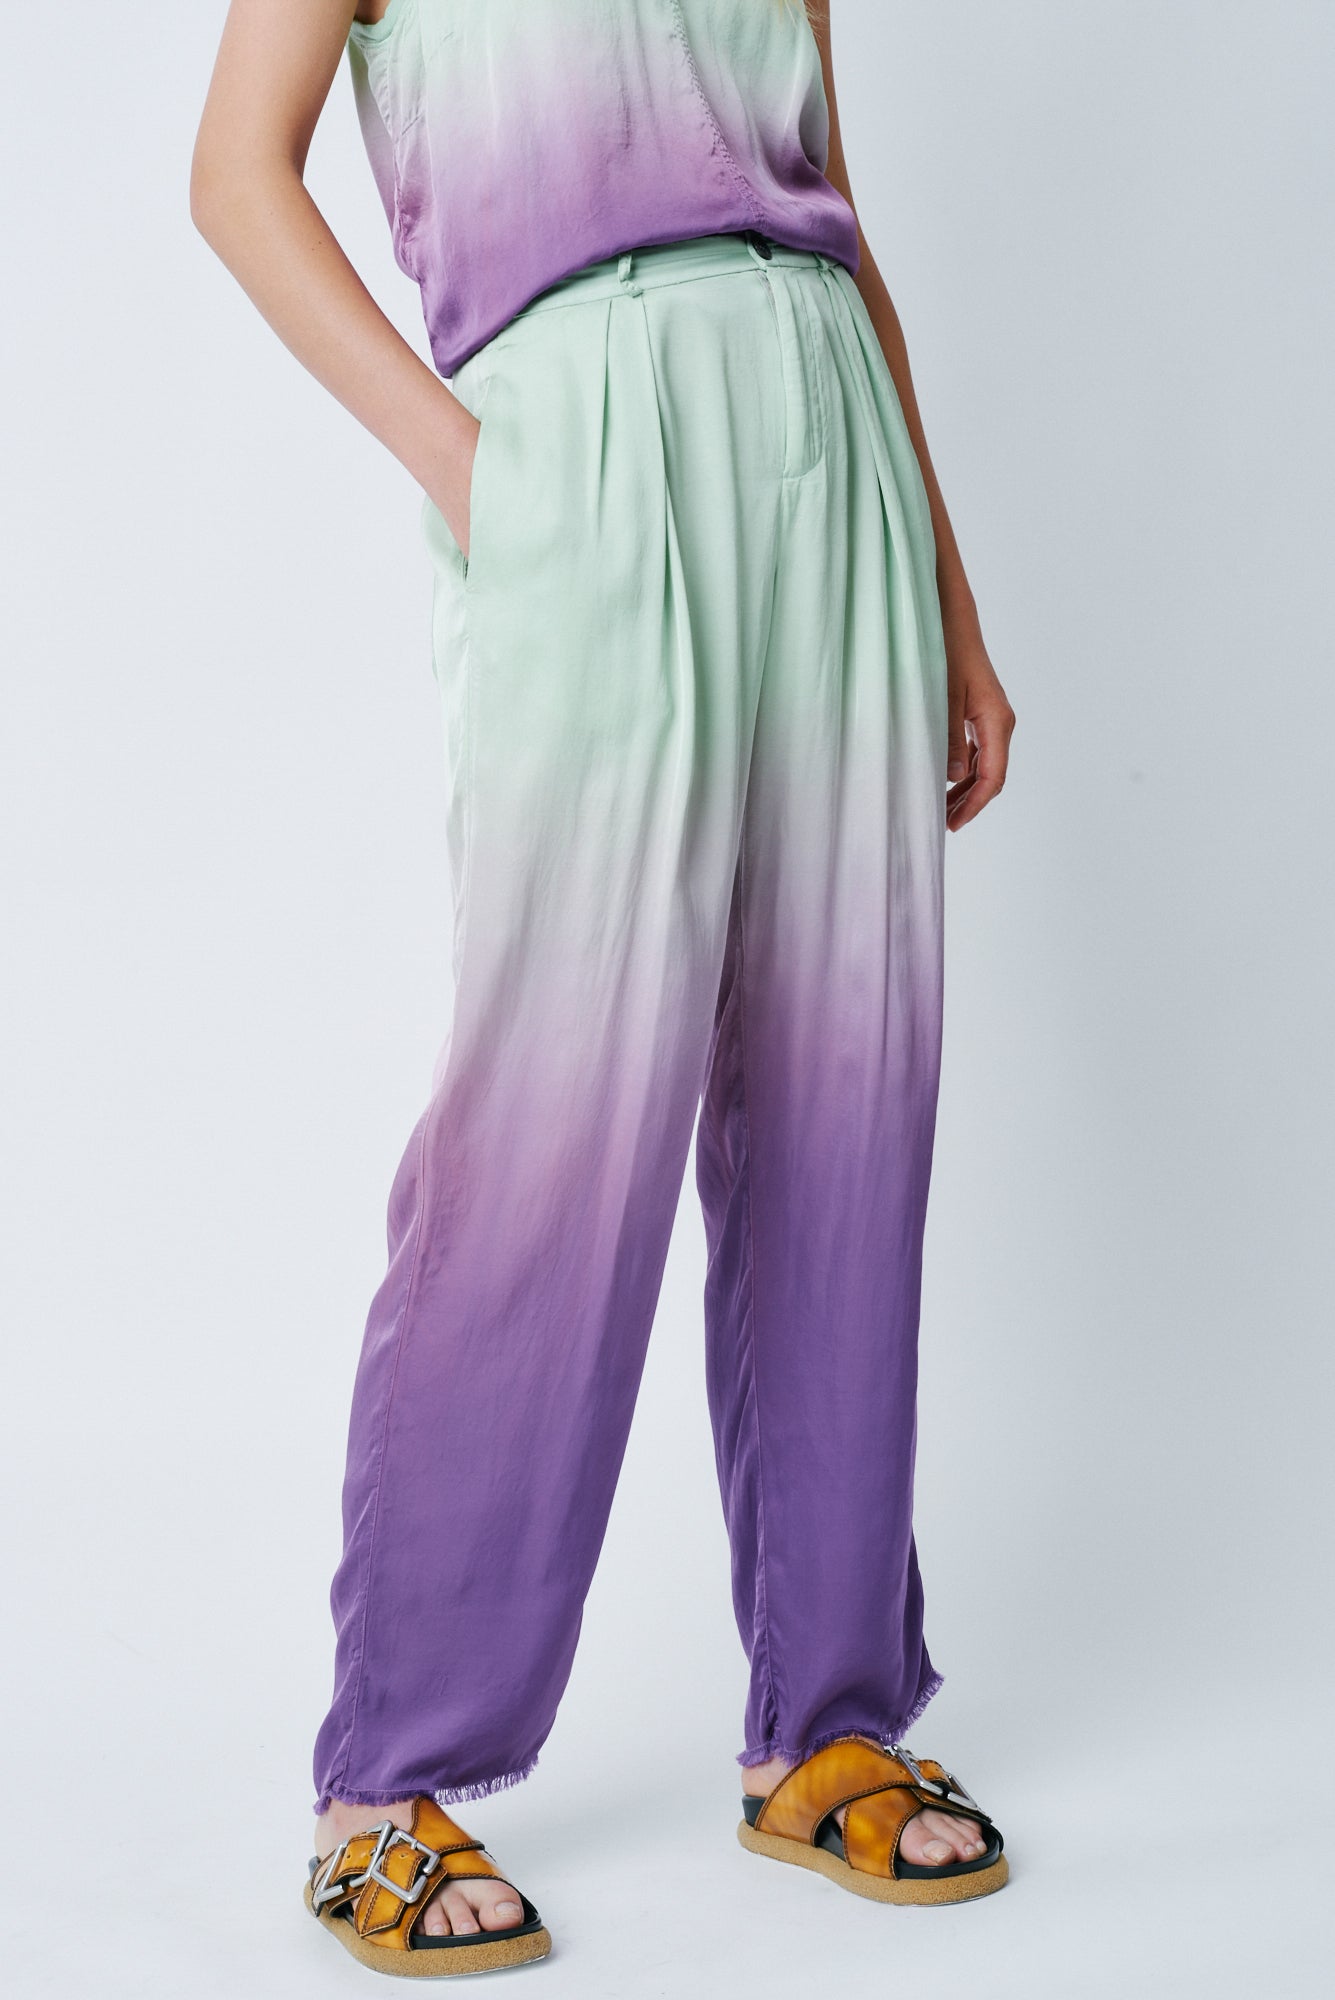 Fantasy Dip Dye Matte Satin Pleated Trouser Side Close-Up View